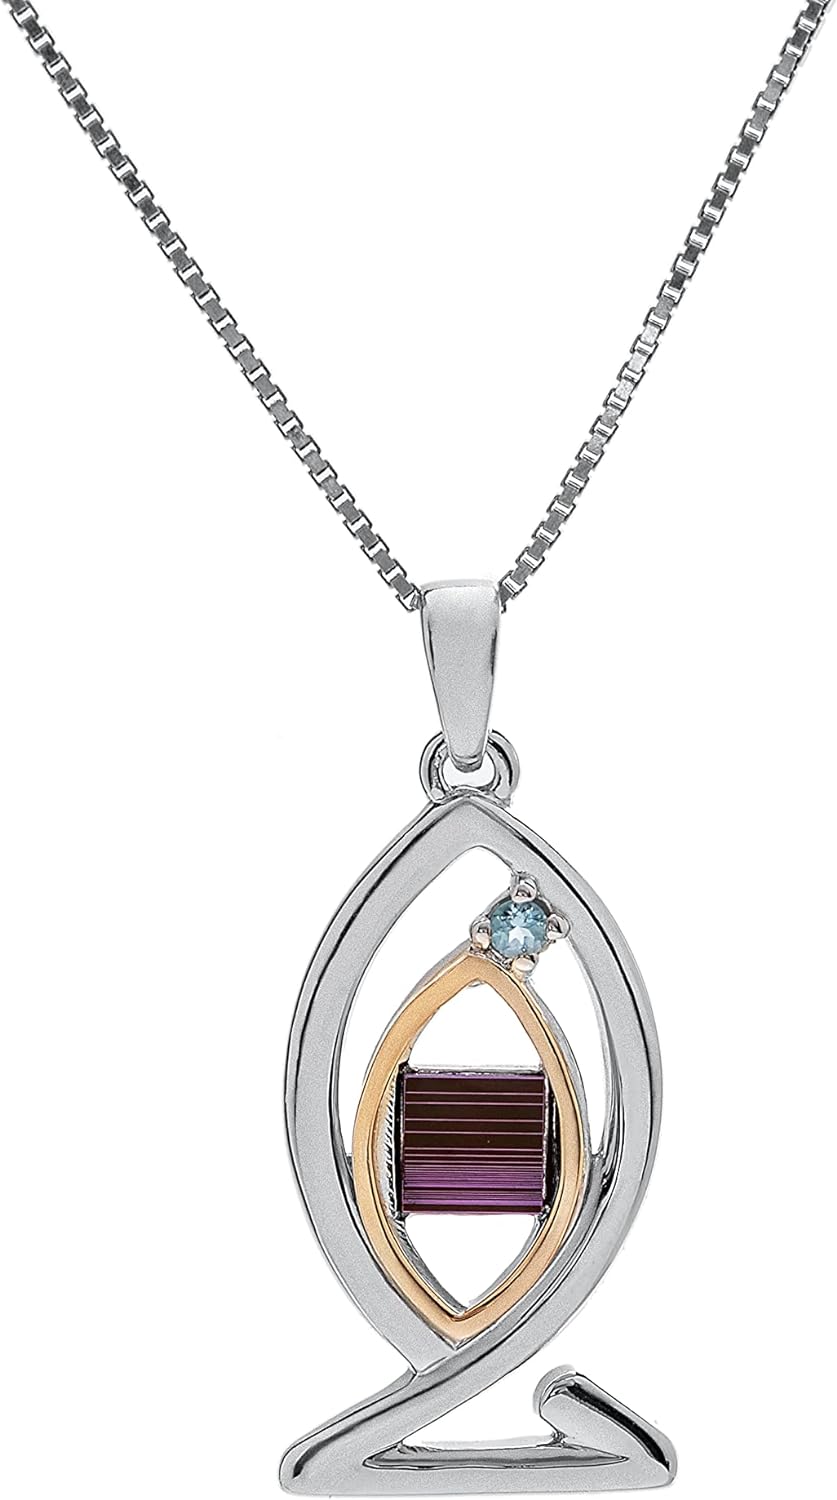 The Peace of God Nano Sim New Testament Silver and 9K Gold Pendant Ichthys studded with Blue Topaz Stone